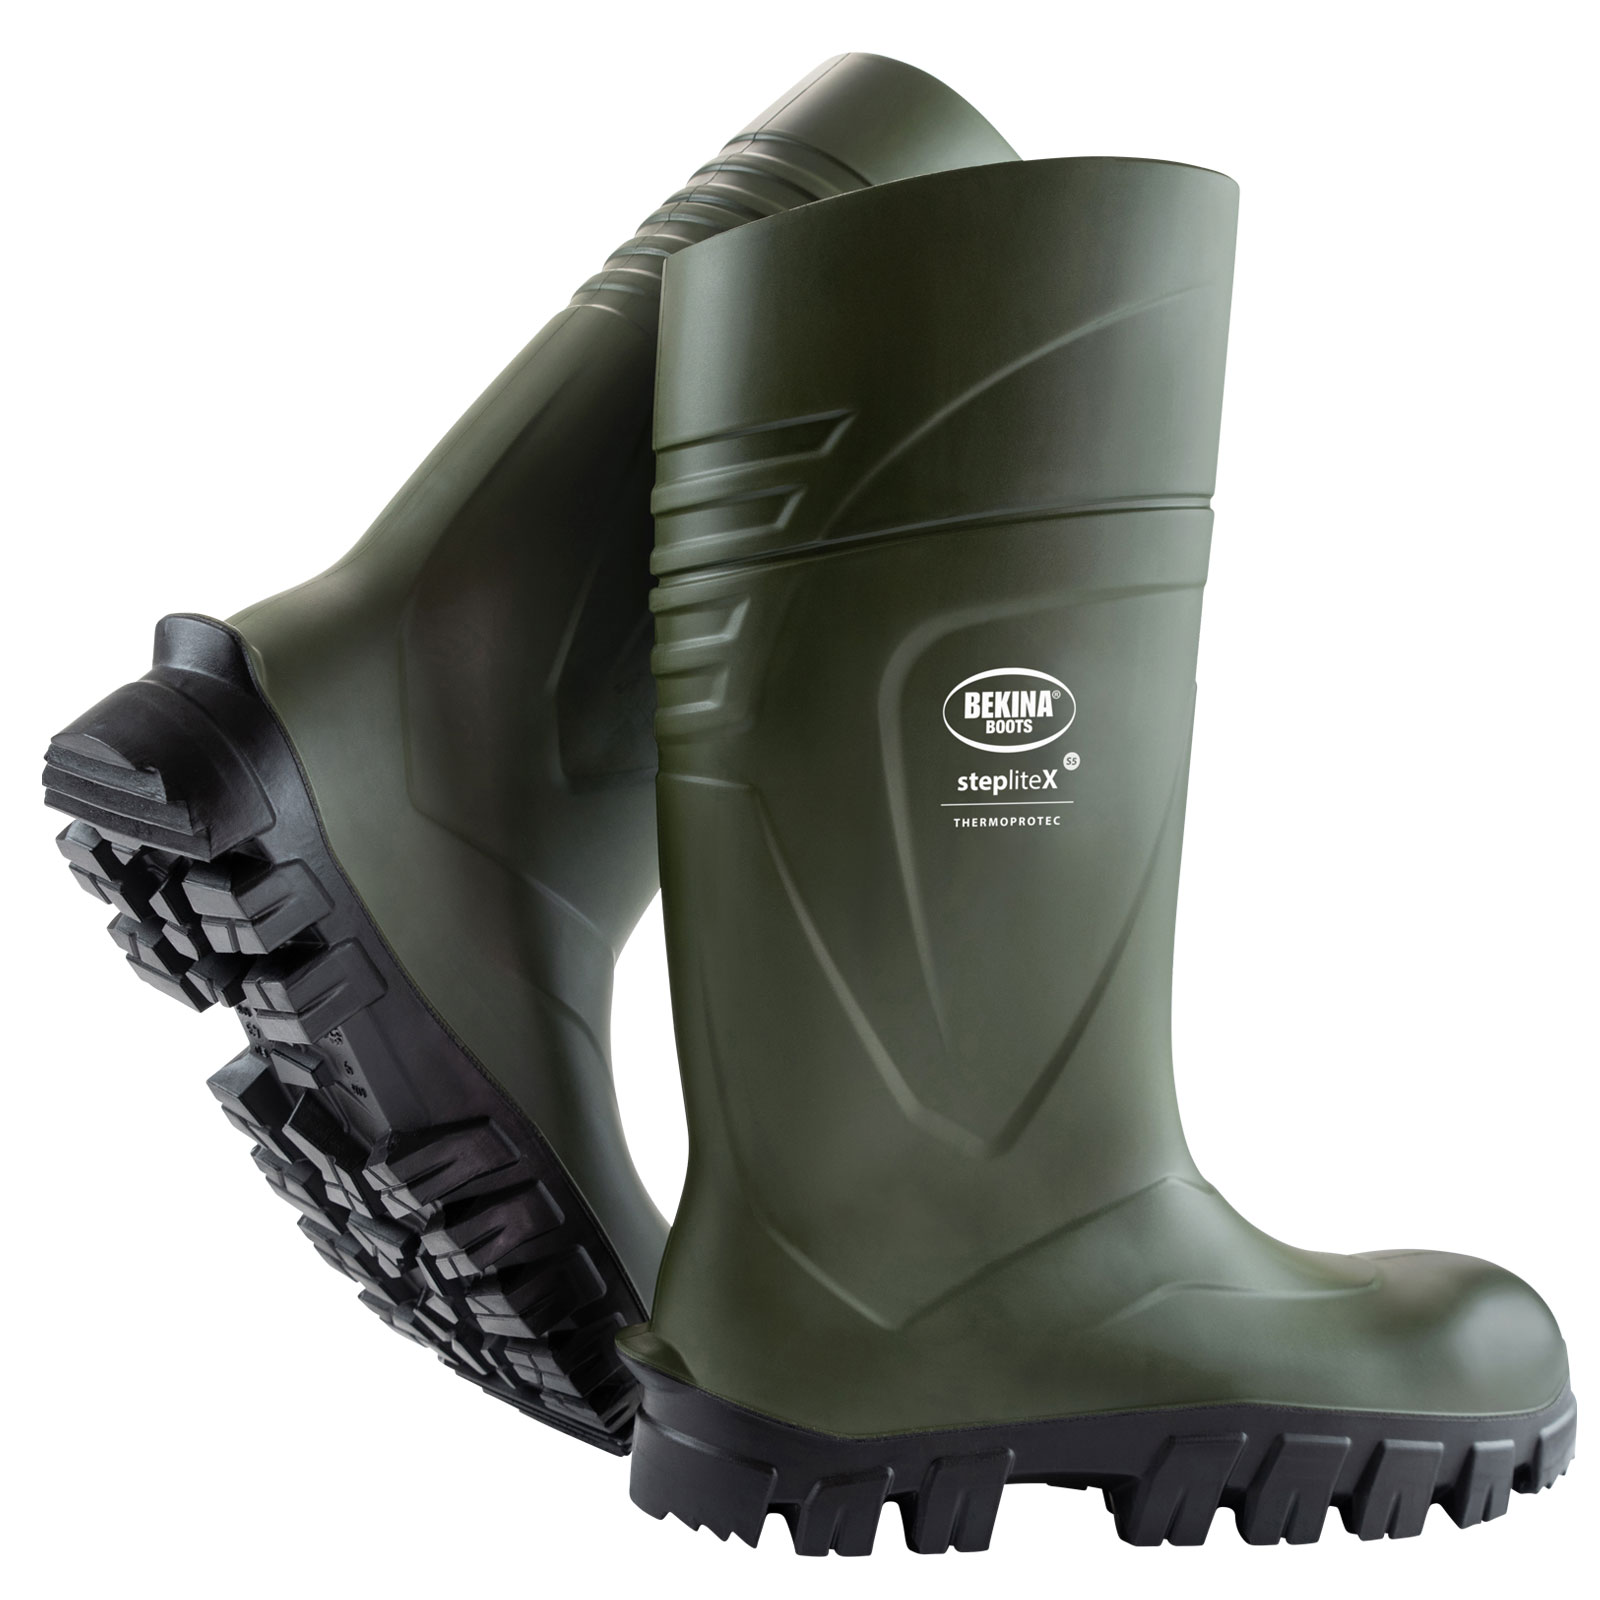 Bekina StepliteX ThermoProtect XCi s5 winter safety boots